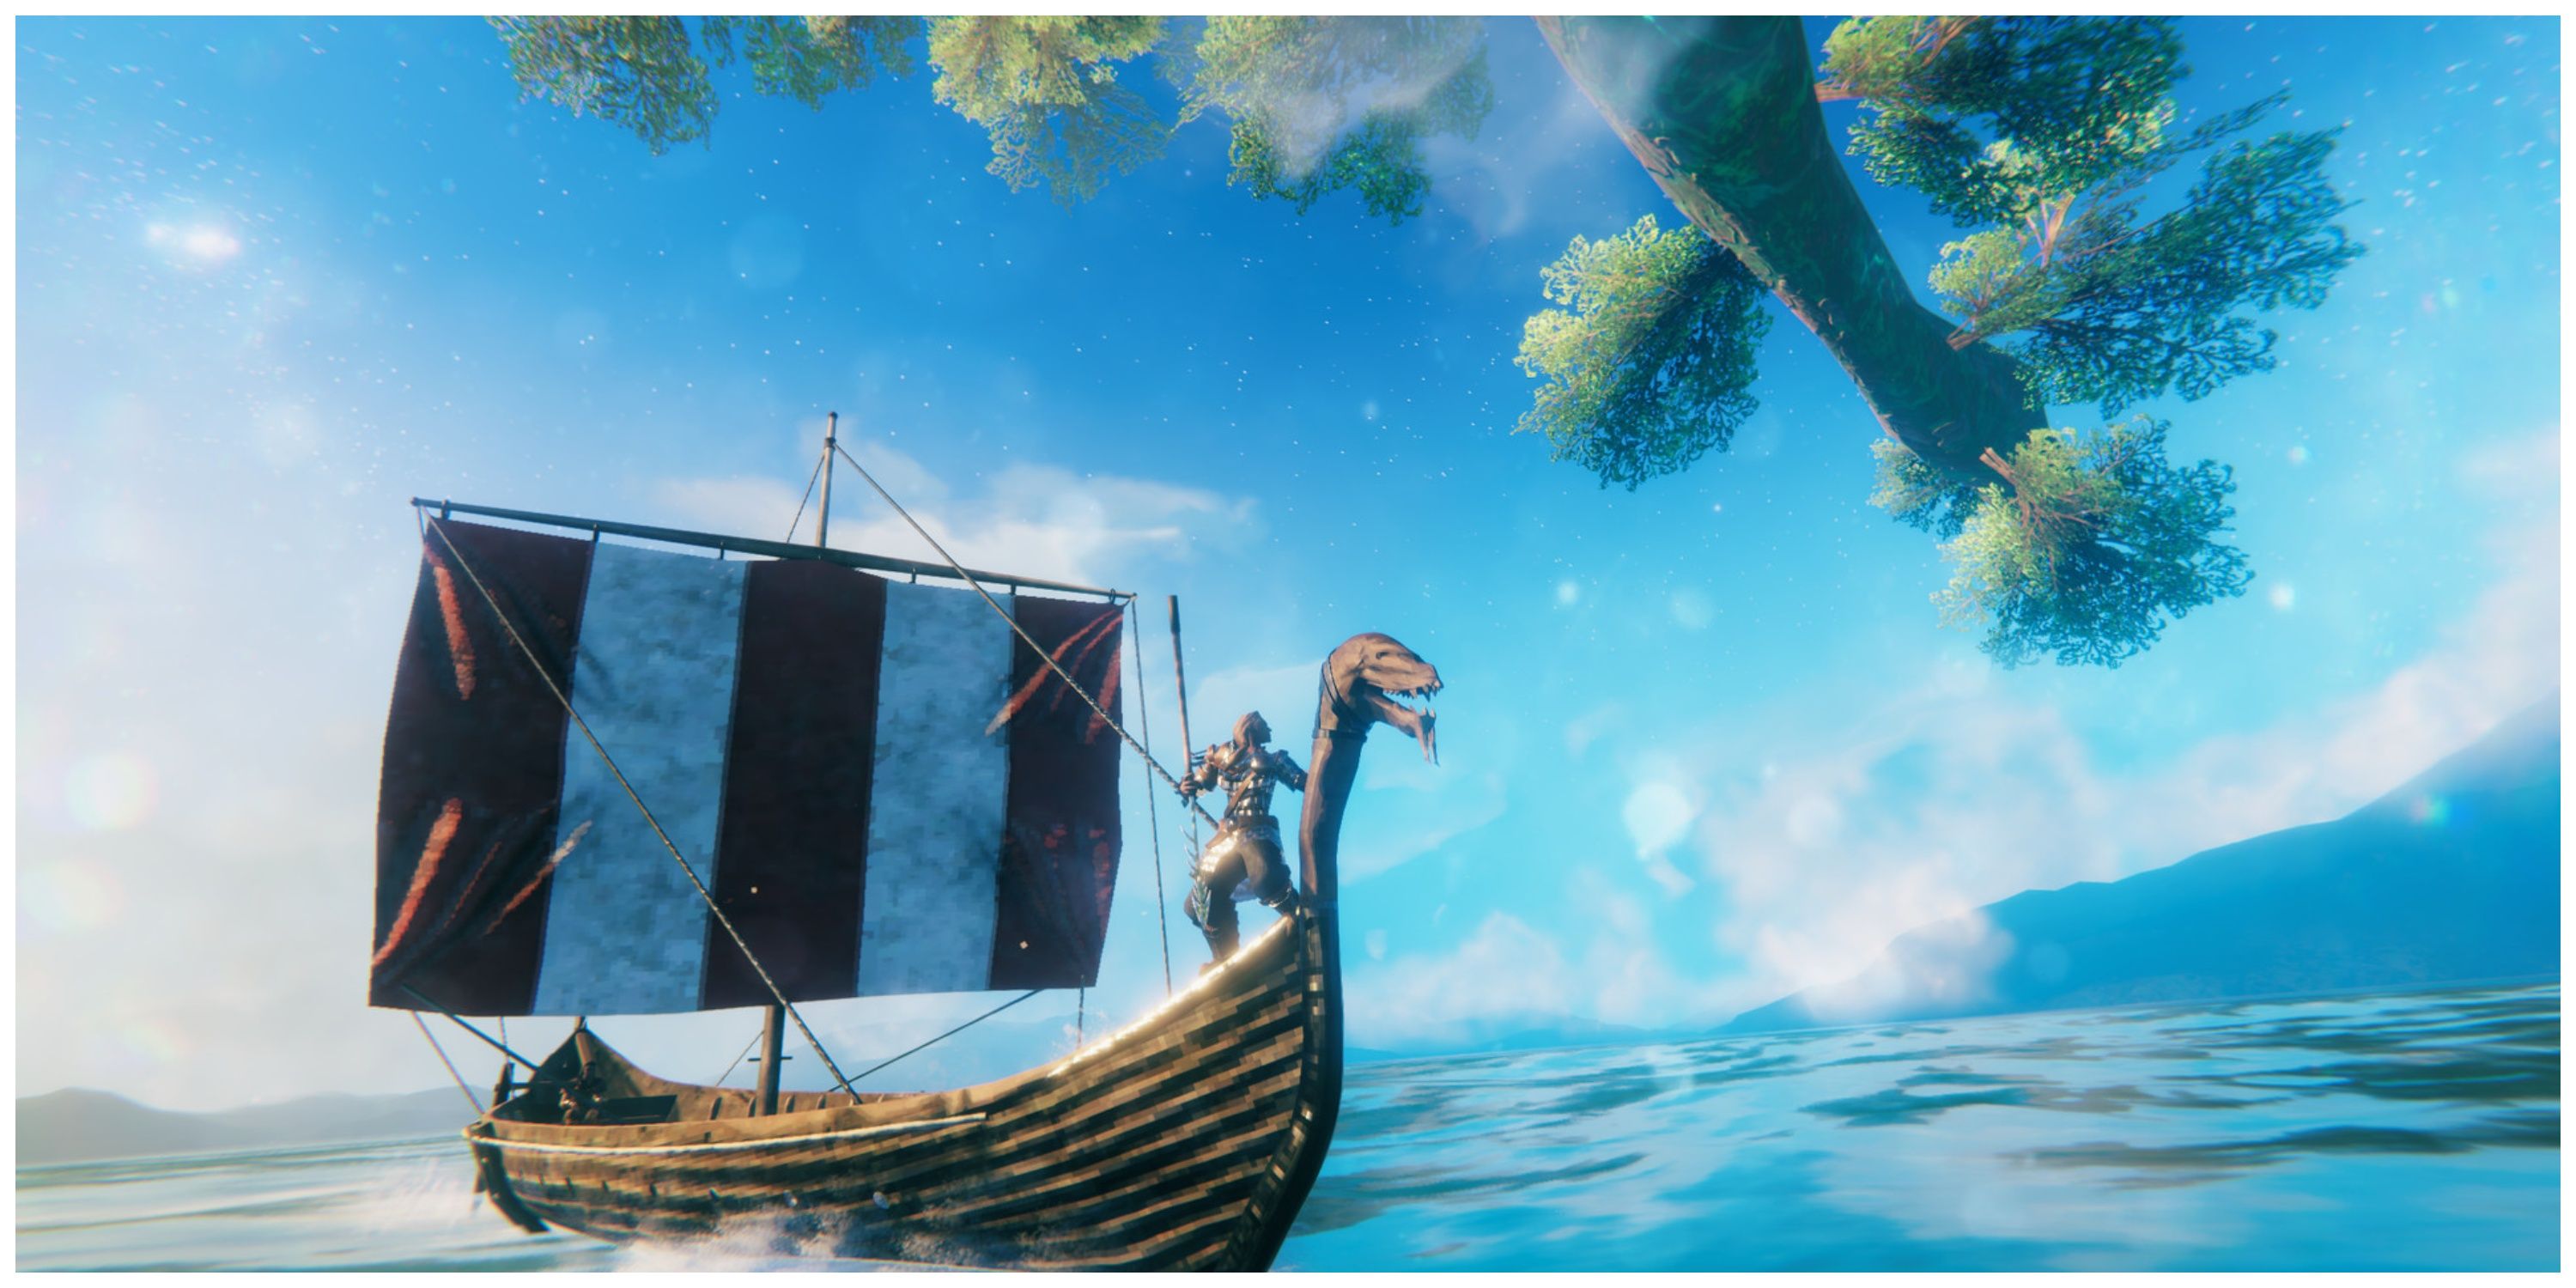 Valheim - Steam Store Page Screenshot (Players Sailing In A Small Boat)